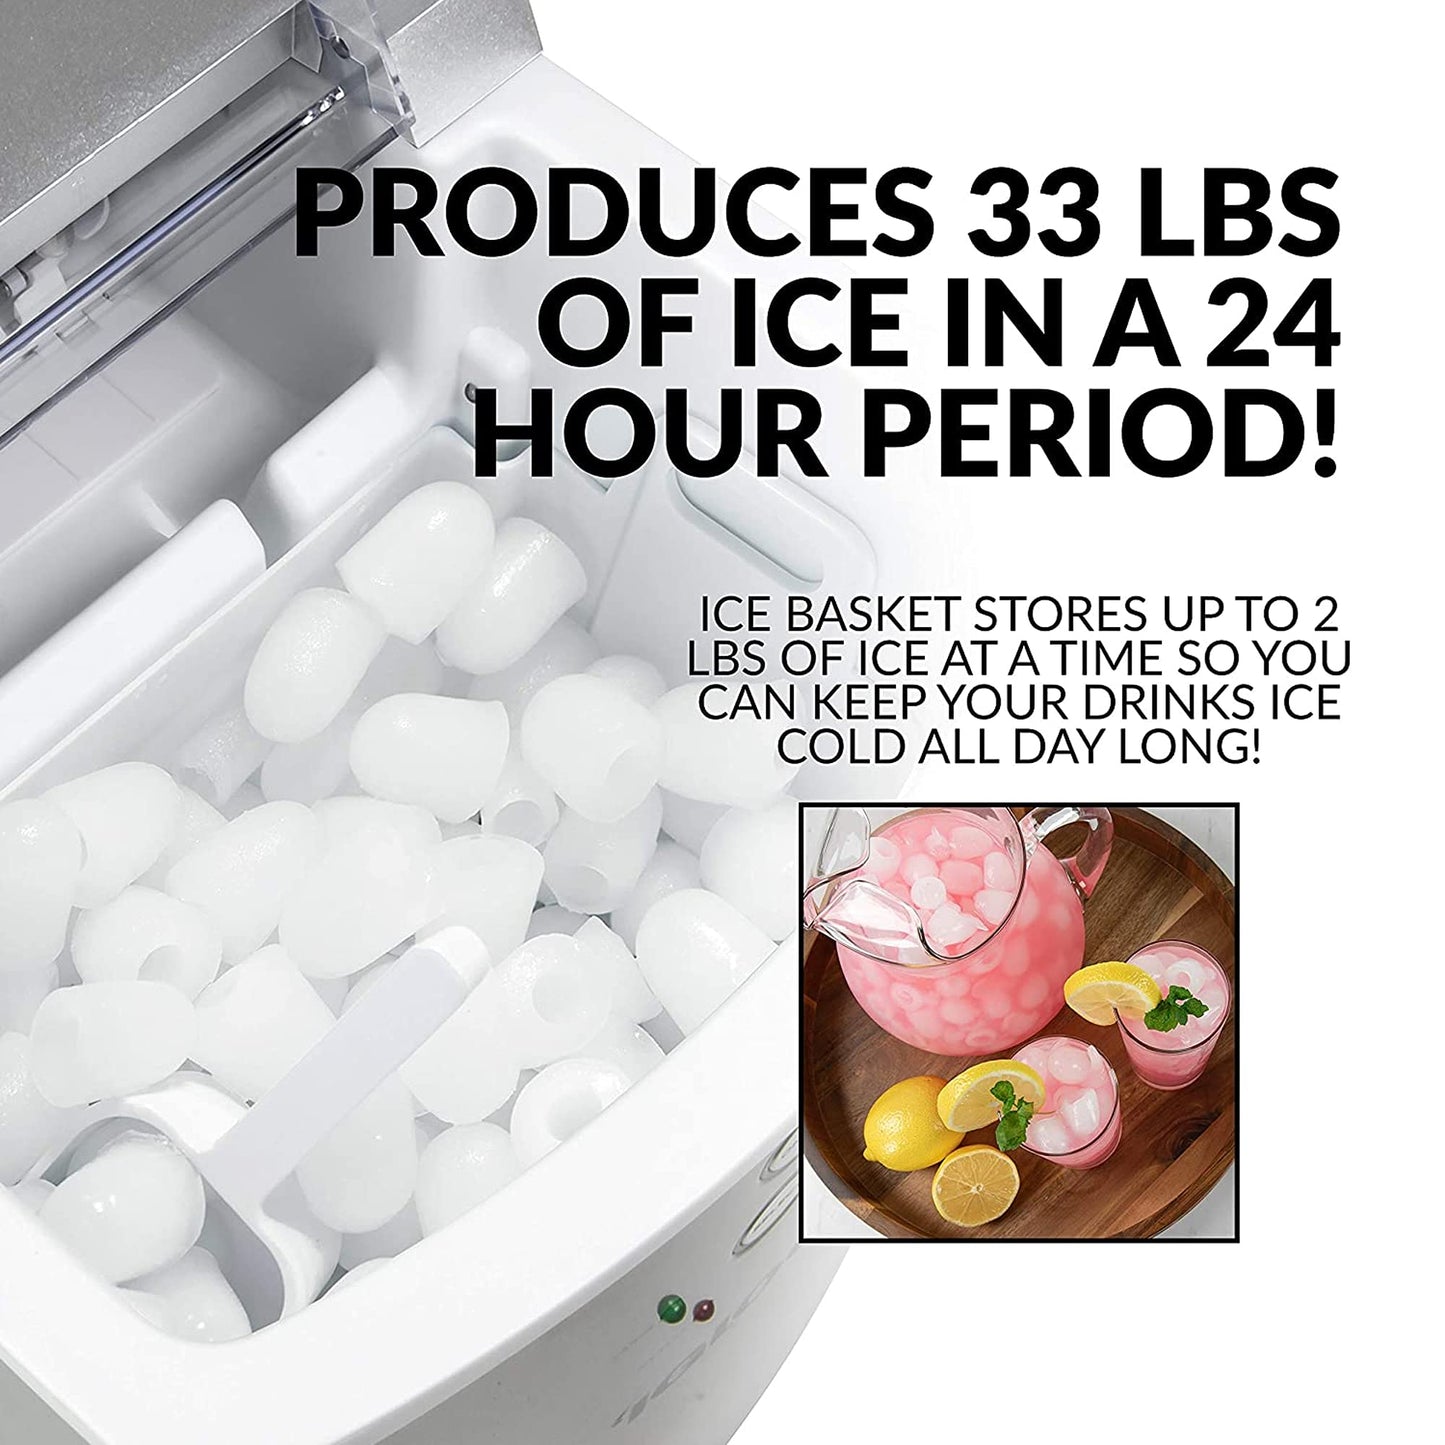 Igloo ICEB33SL Large-Capacity Automatic Portable Electric Countertop Ice Maker Machine, 33 Pounds in 24 Hours, 9 Ice Cubes Ready in 7 minutes